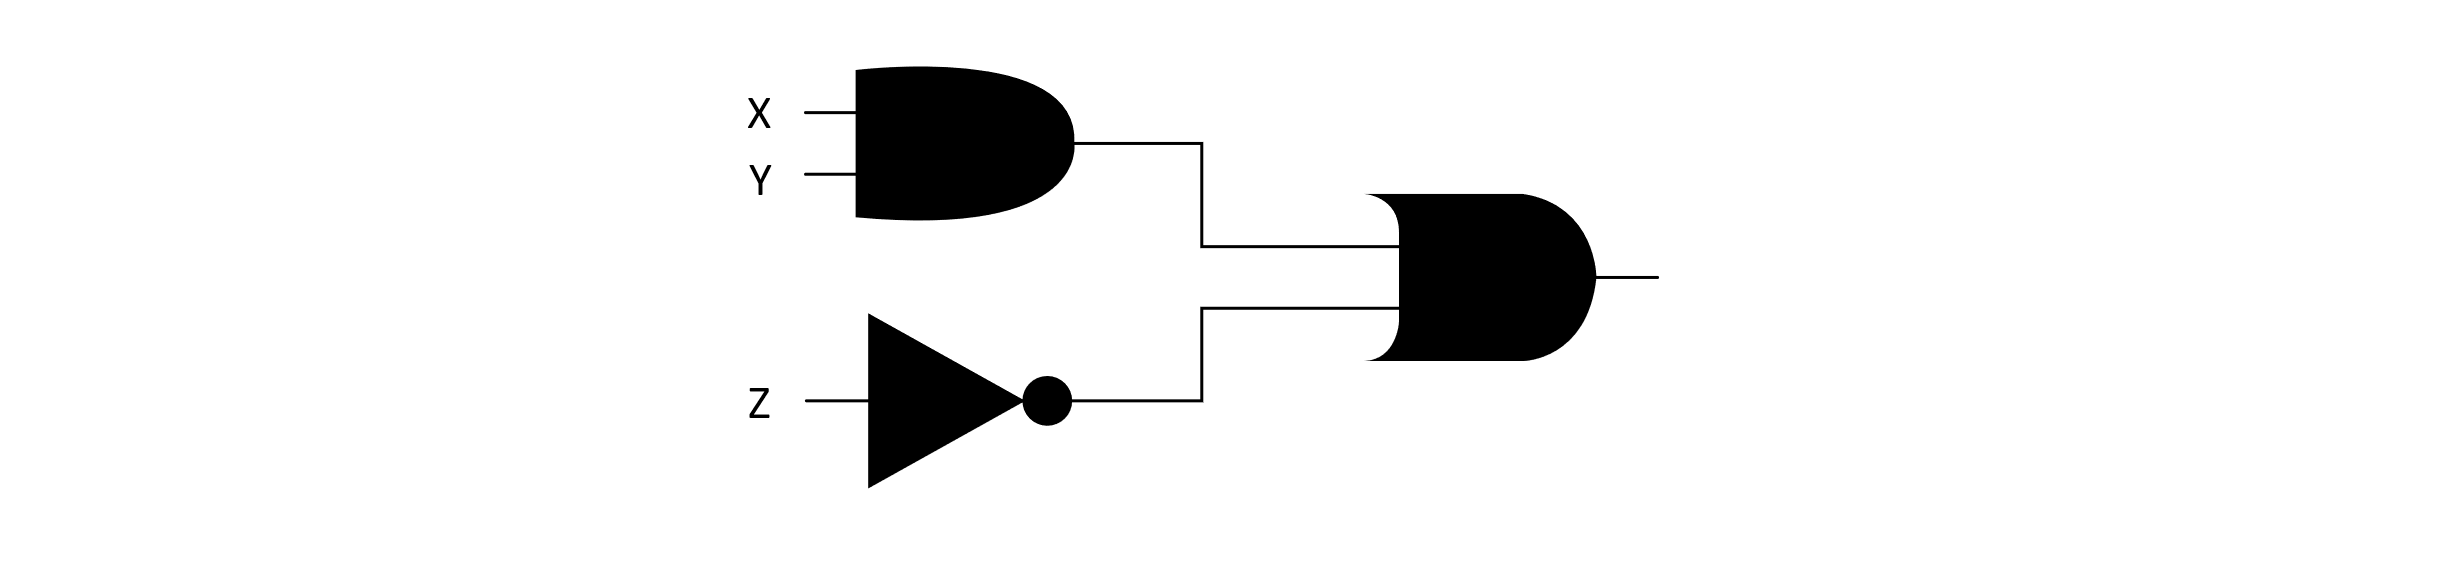 An example cicuit using the logic gate symbols.